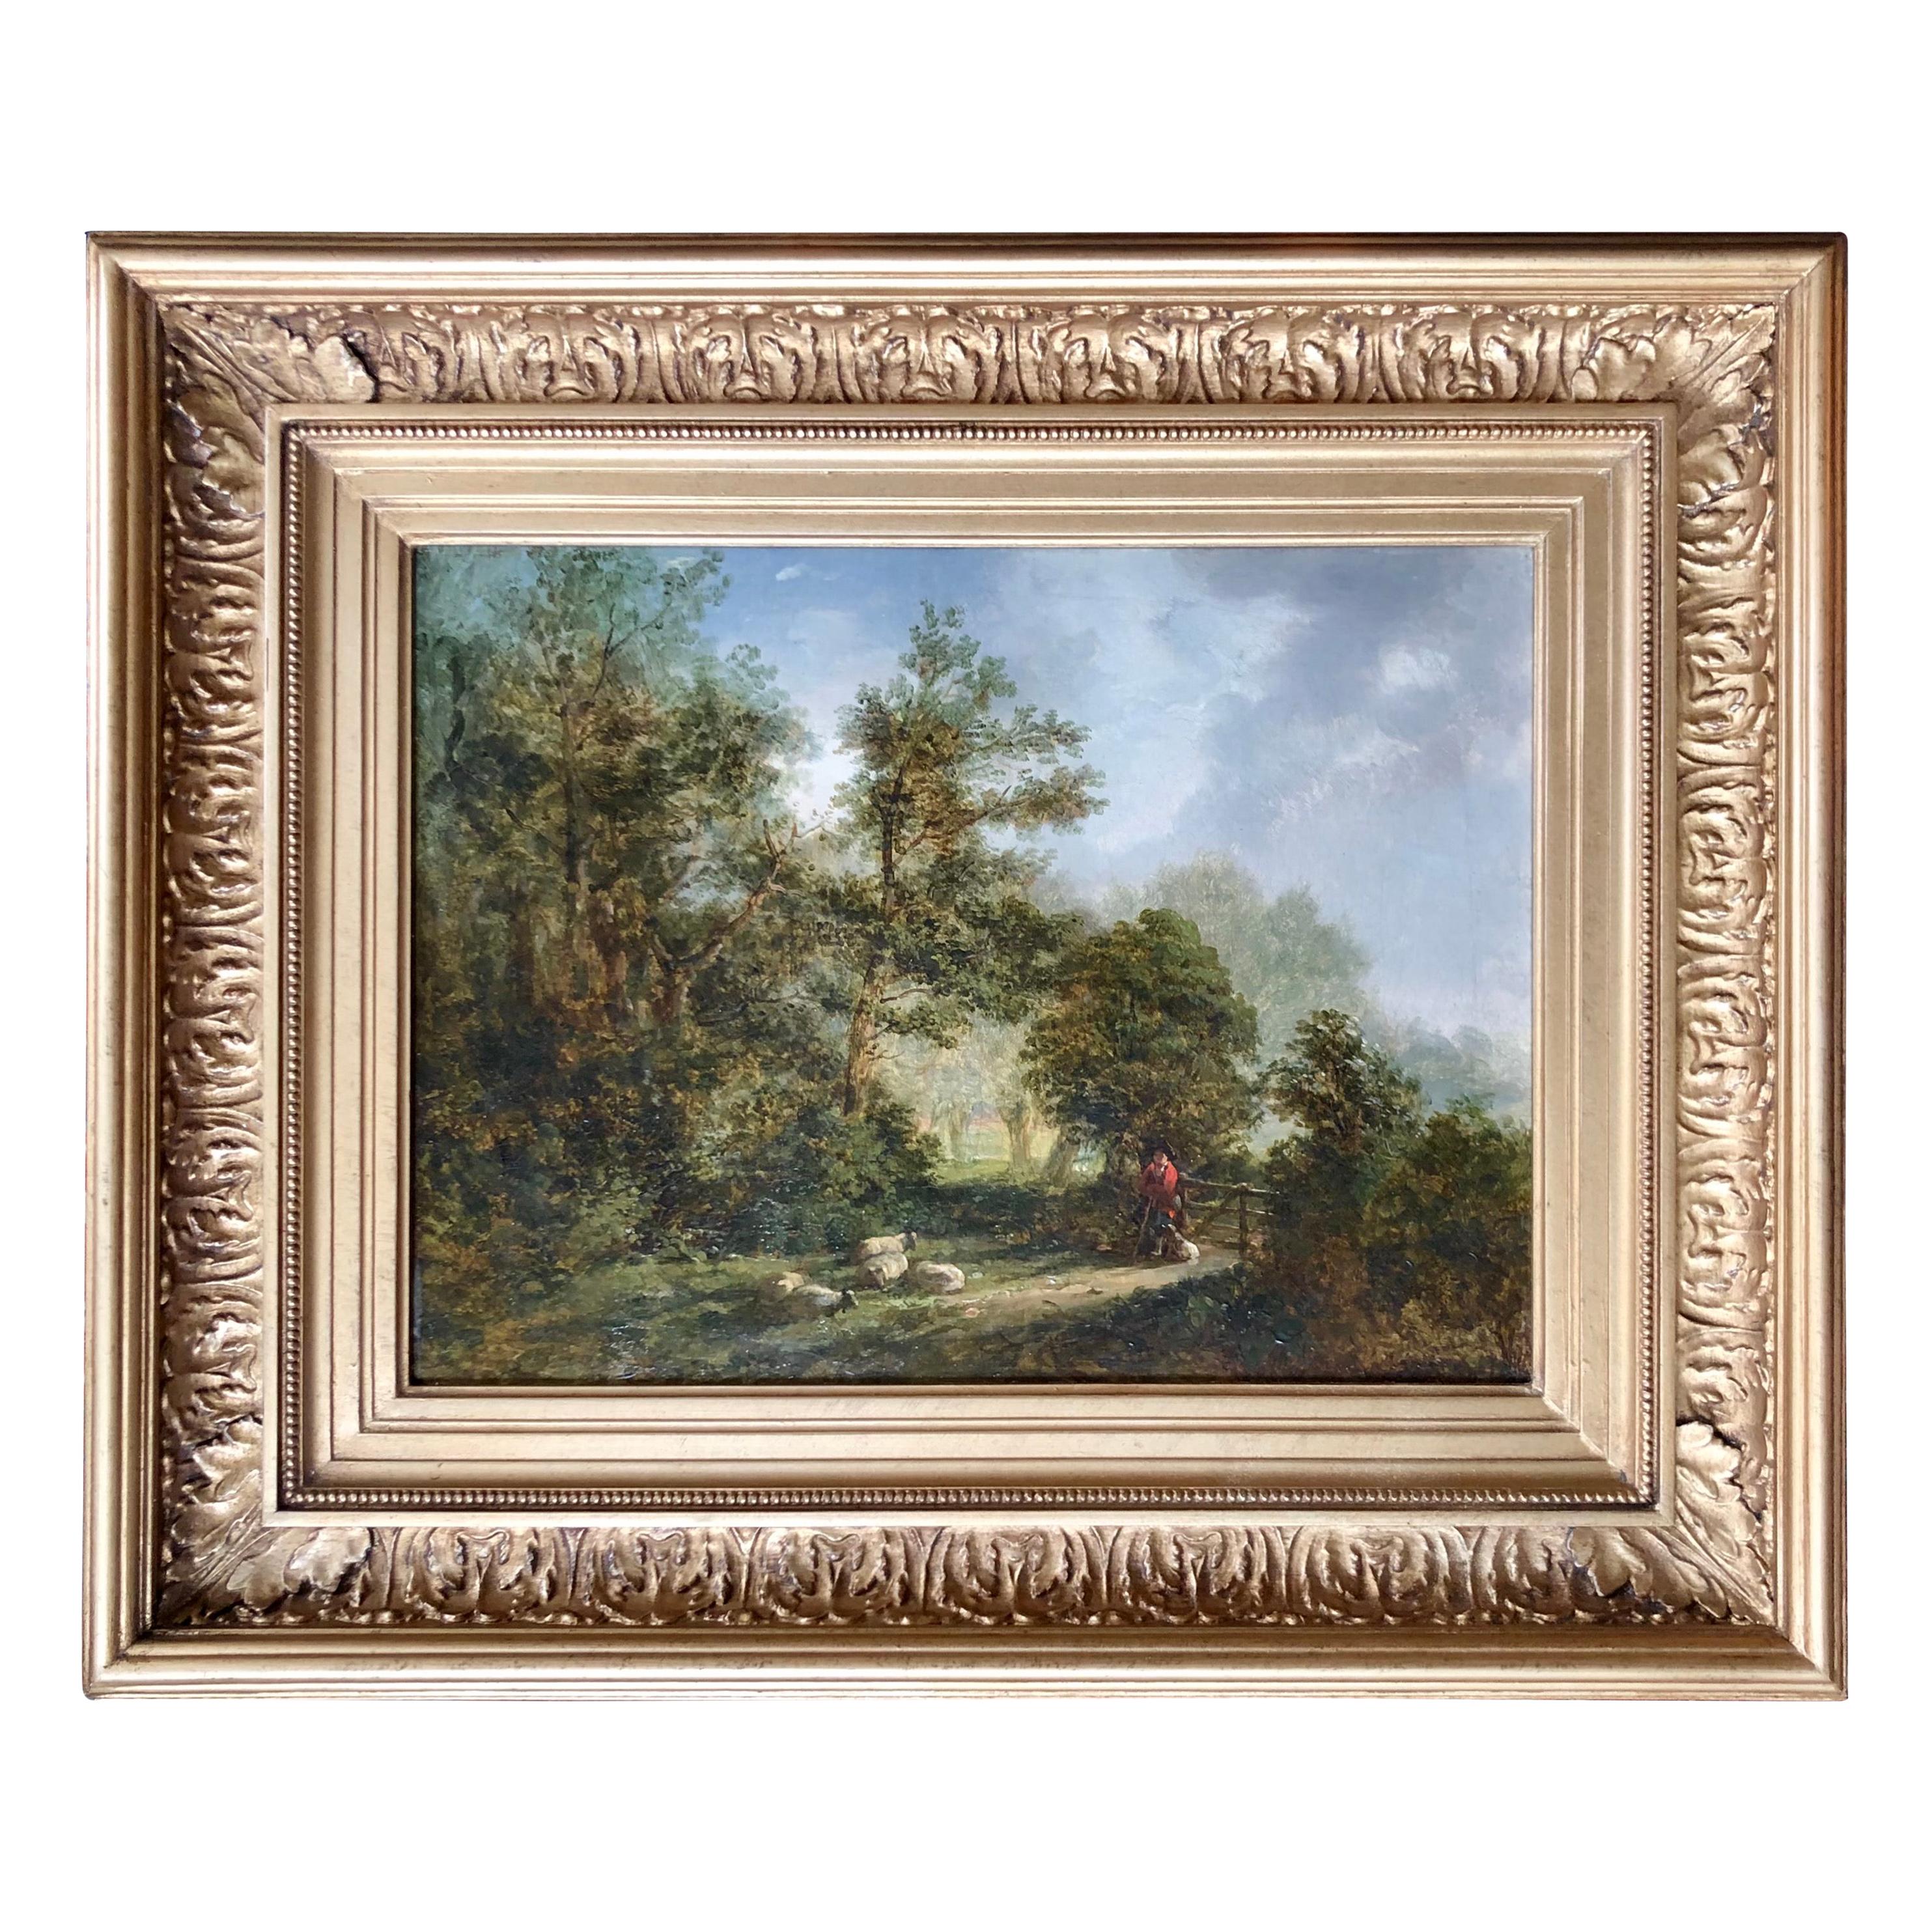 "Shepherd in a Clearing" Attributed to Alexander Nasmyth